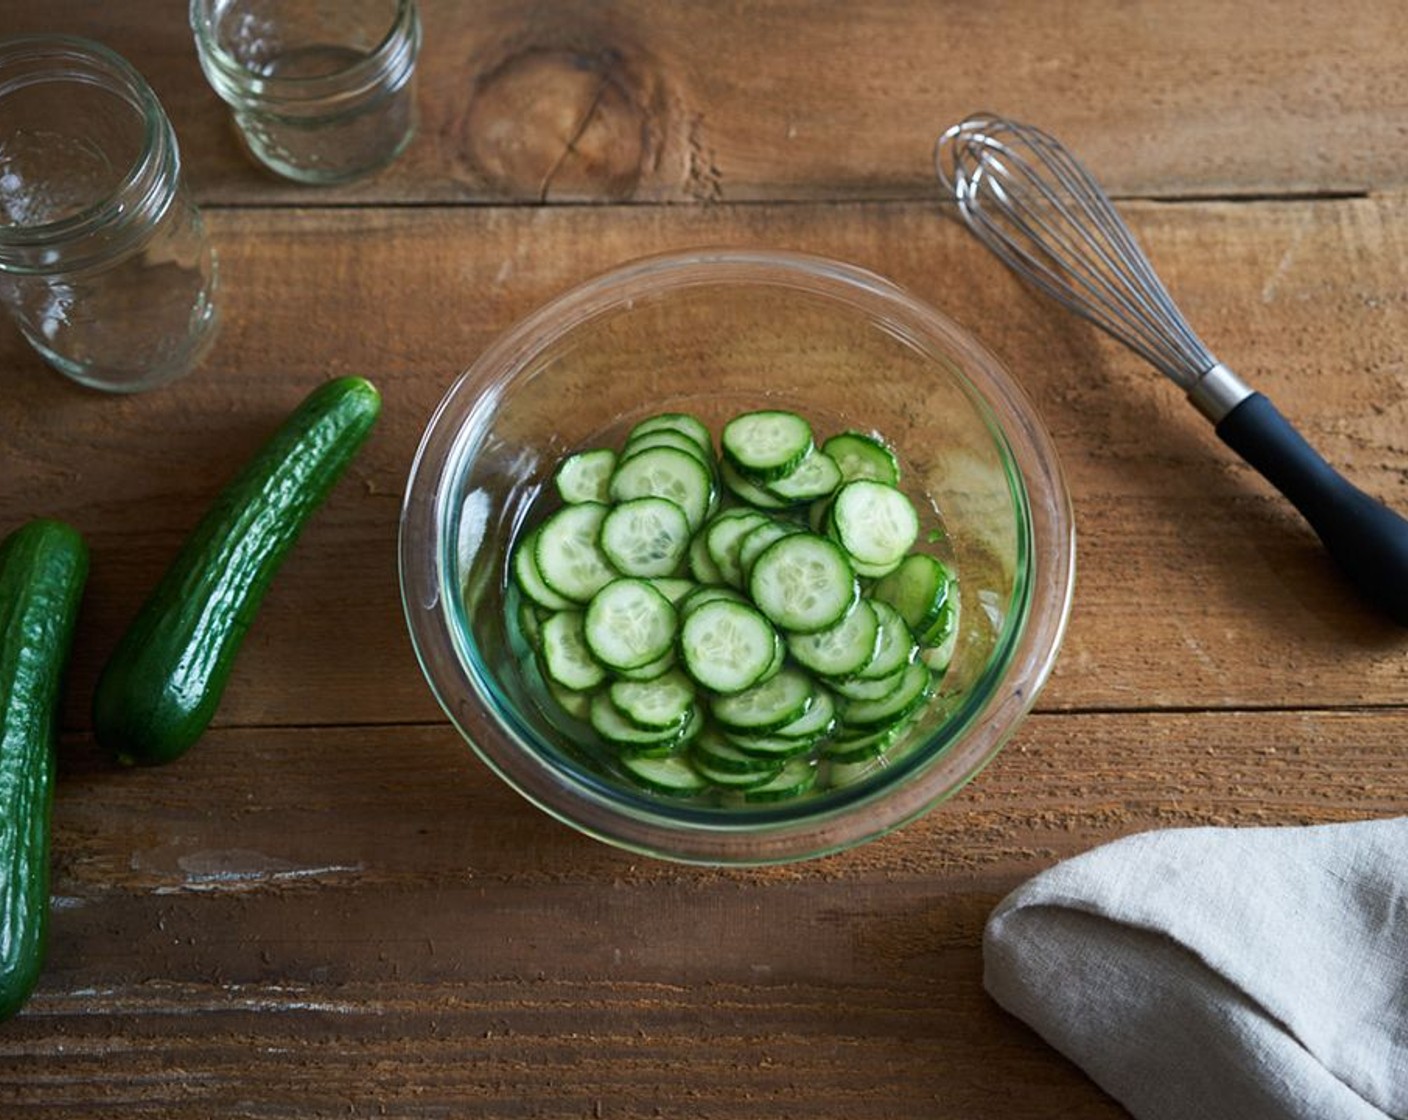 step 3 Allow to sit at room temperature for at least 15 minutes. You can squeeze the cucumbers gently with your hands to speed up the pickling process. Pickles can be stored in the fridge for up to two months.